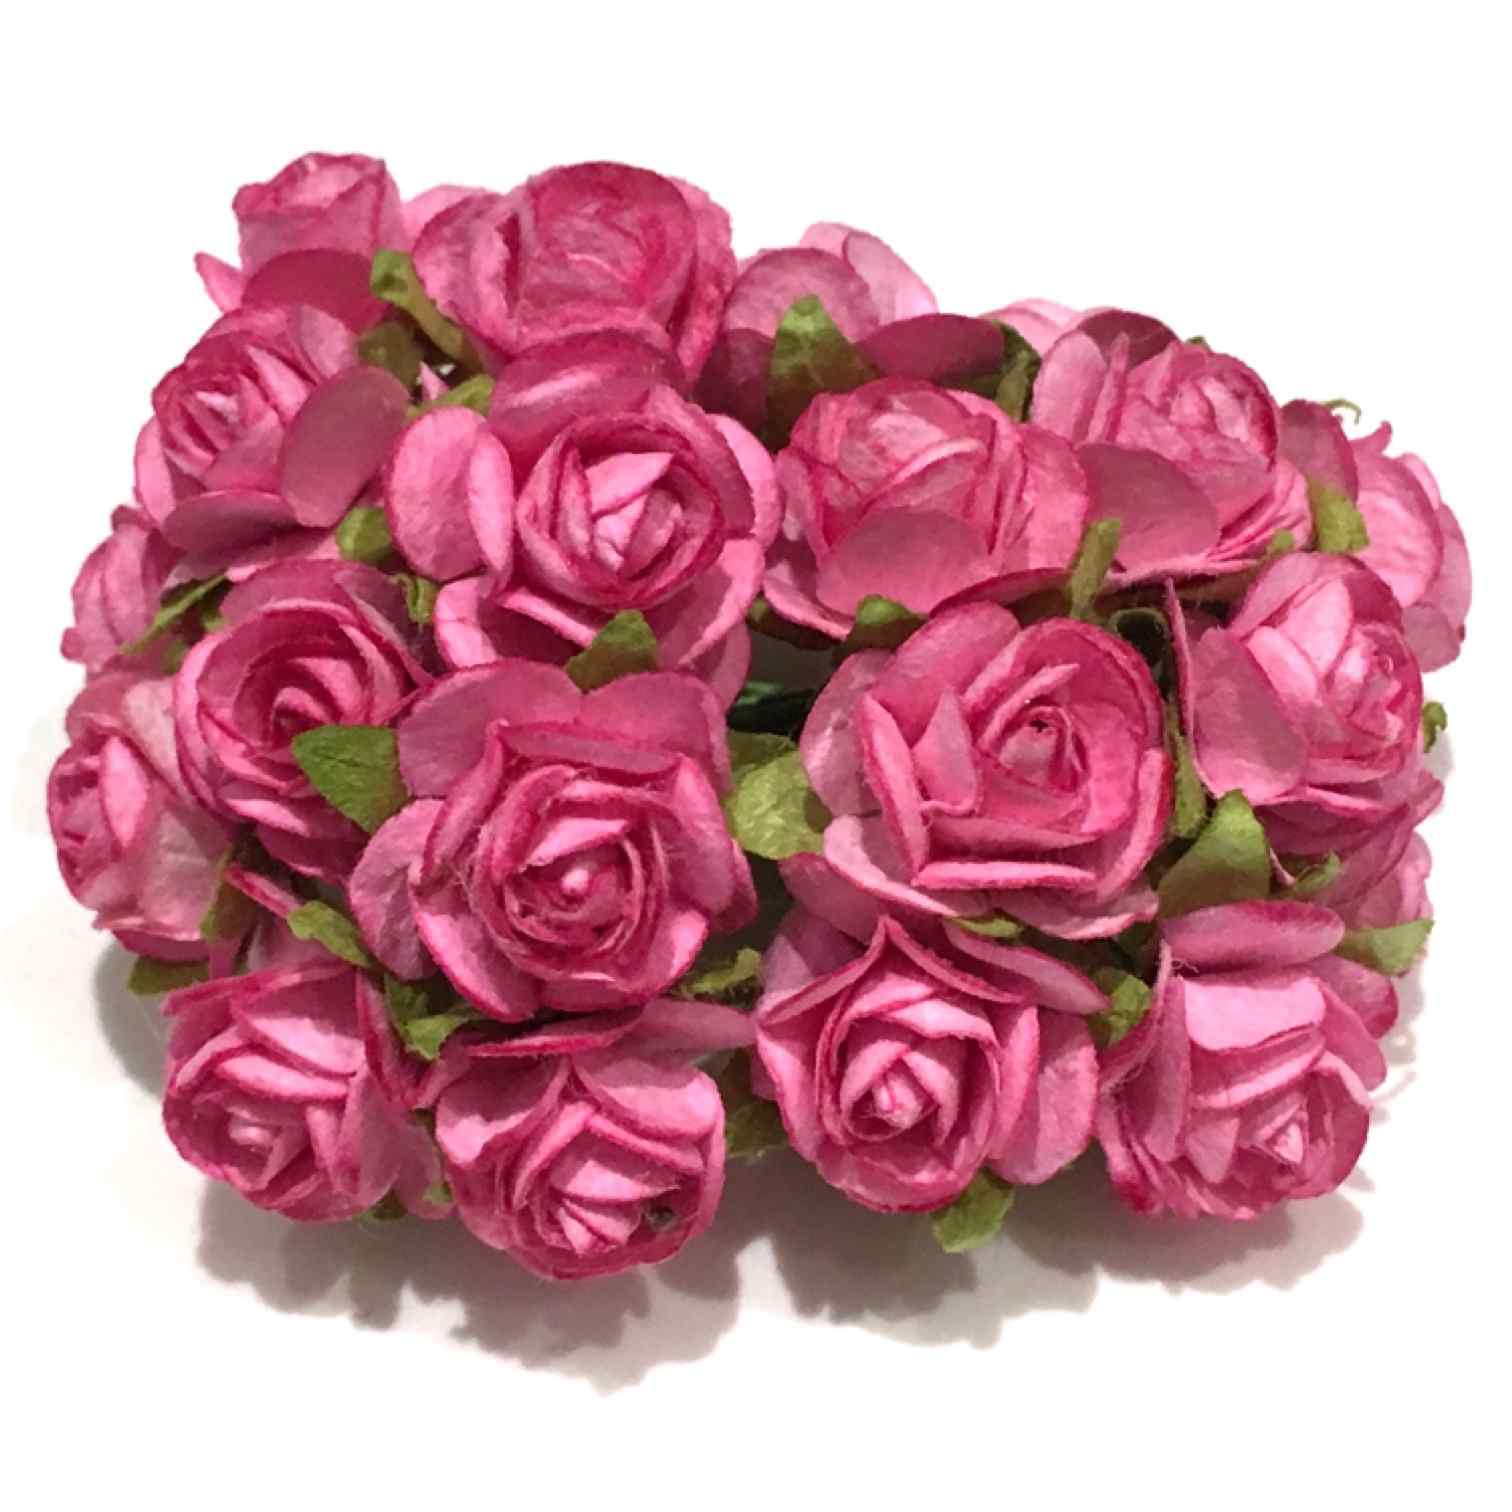 Deep Pink Open Mulberry Paper Roses Or077